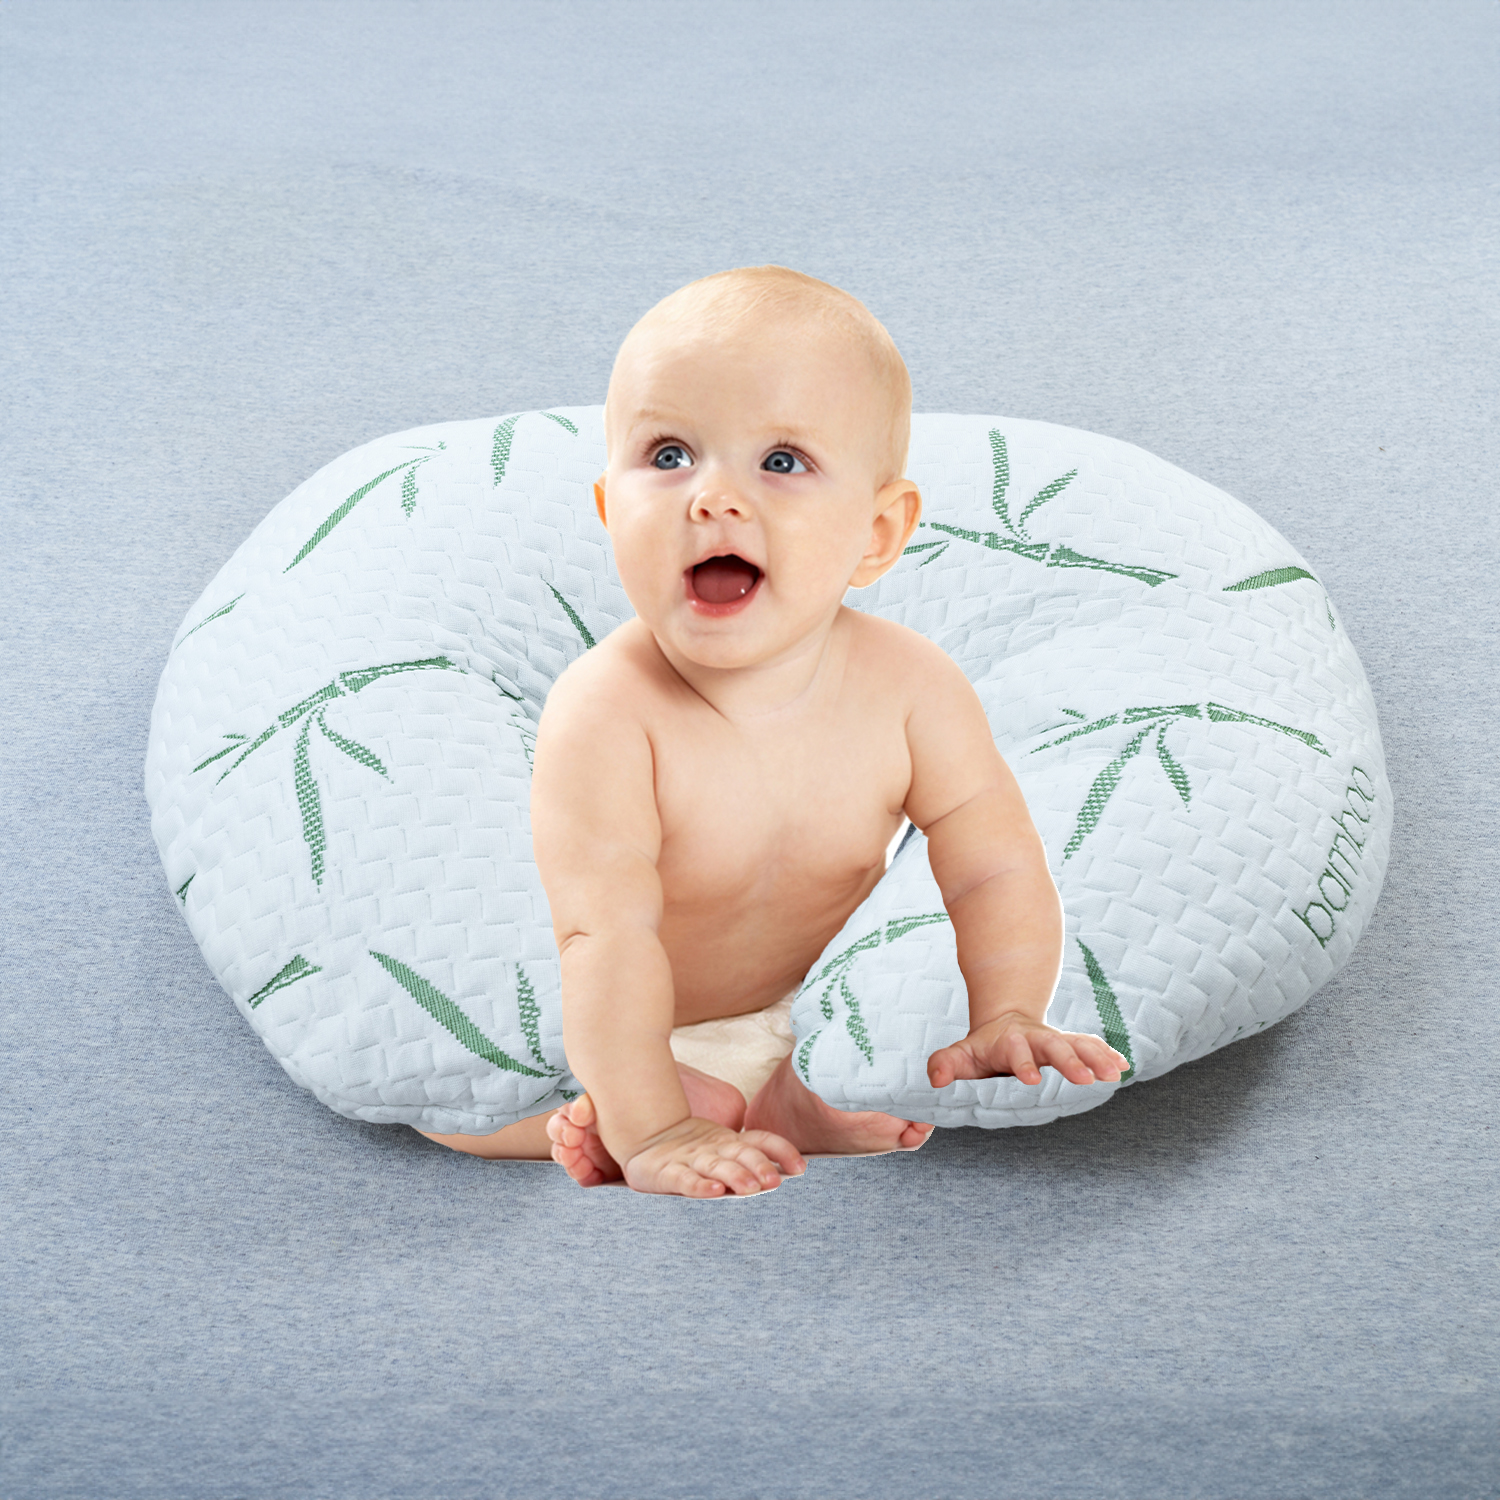 Nursing, Breastfeeding Baby Support Pillow, Newborn Infant Feeding Cushion | Portable for Travel | Nursing Pillow for Boys & Girls With Washable Zippered Bamboo Pillow Covered - image 4 of 10